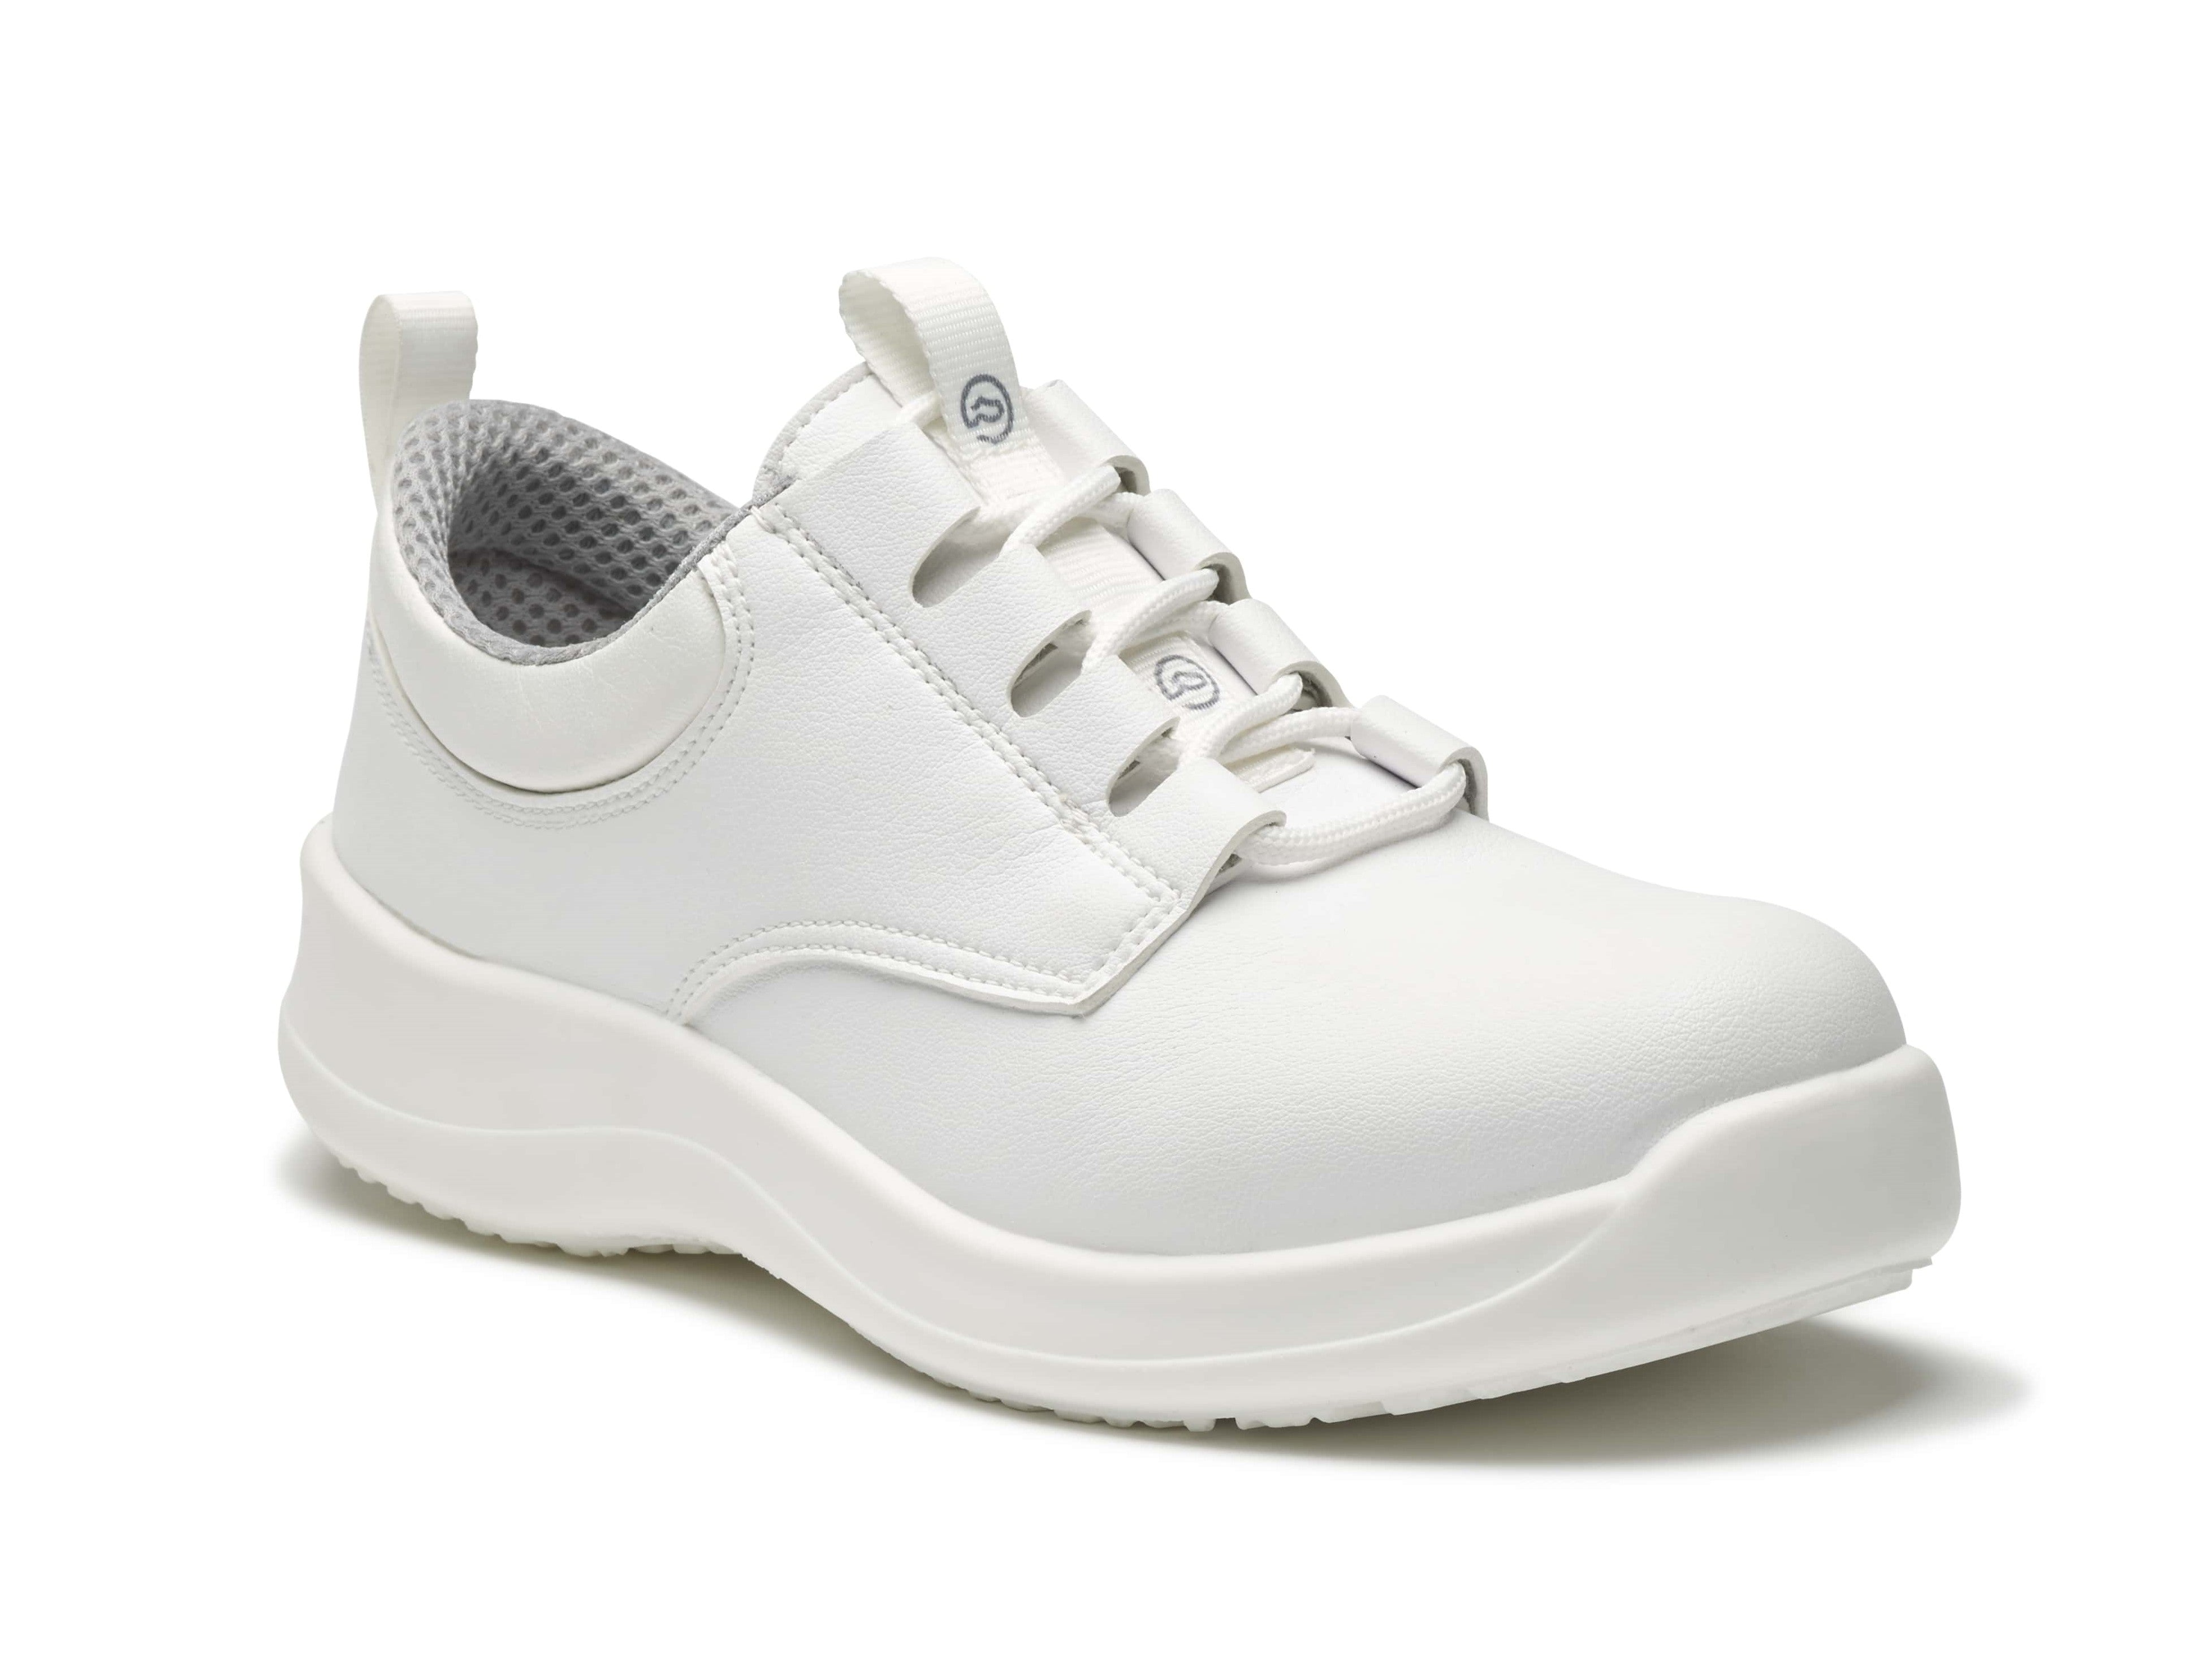 An image of Toffeln SafetyLite (lace up), White / 8